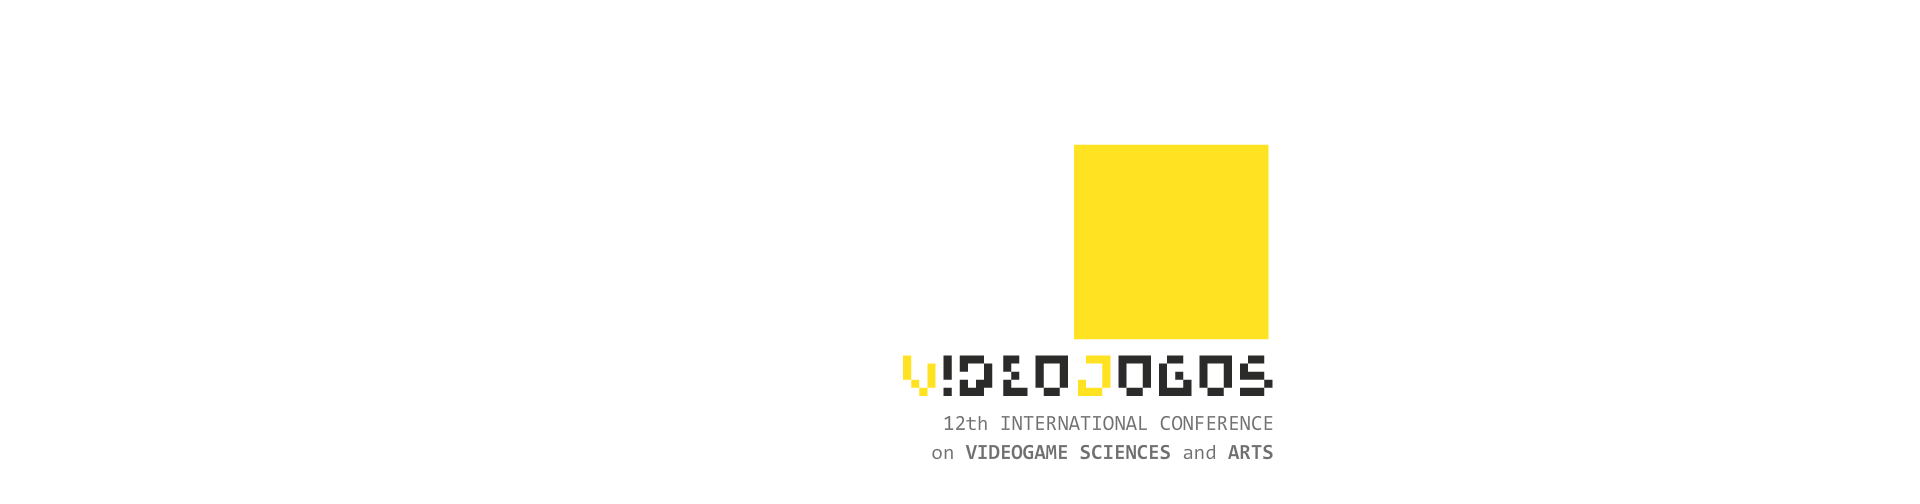 Artwork for Videojogos 2020. A square pixelated egg featuring the title of the conference and animated year